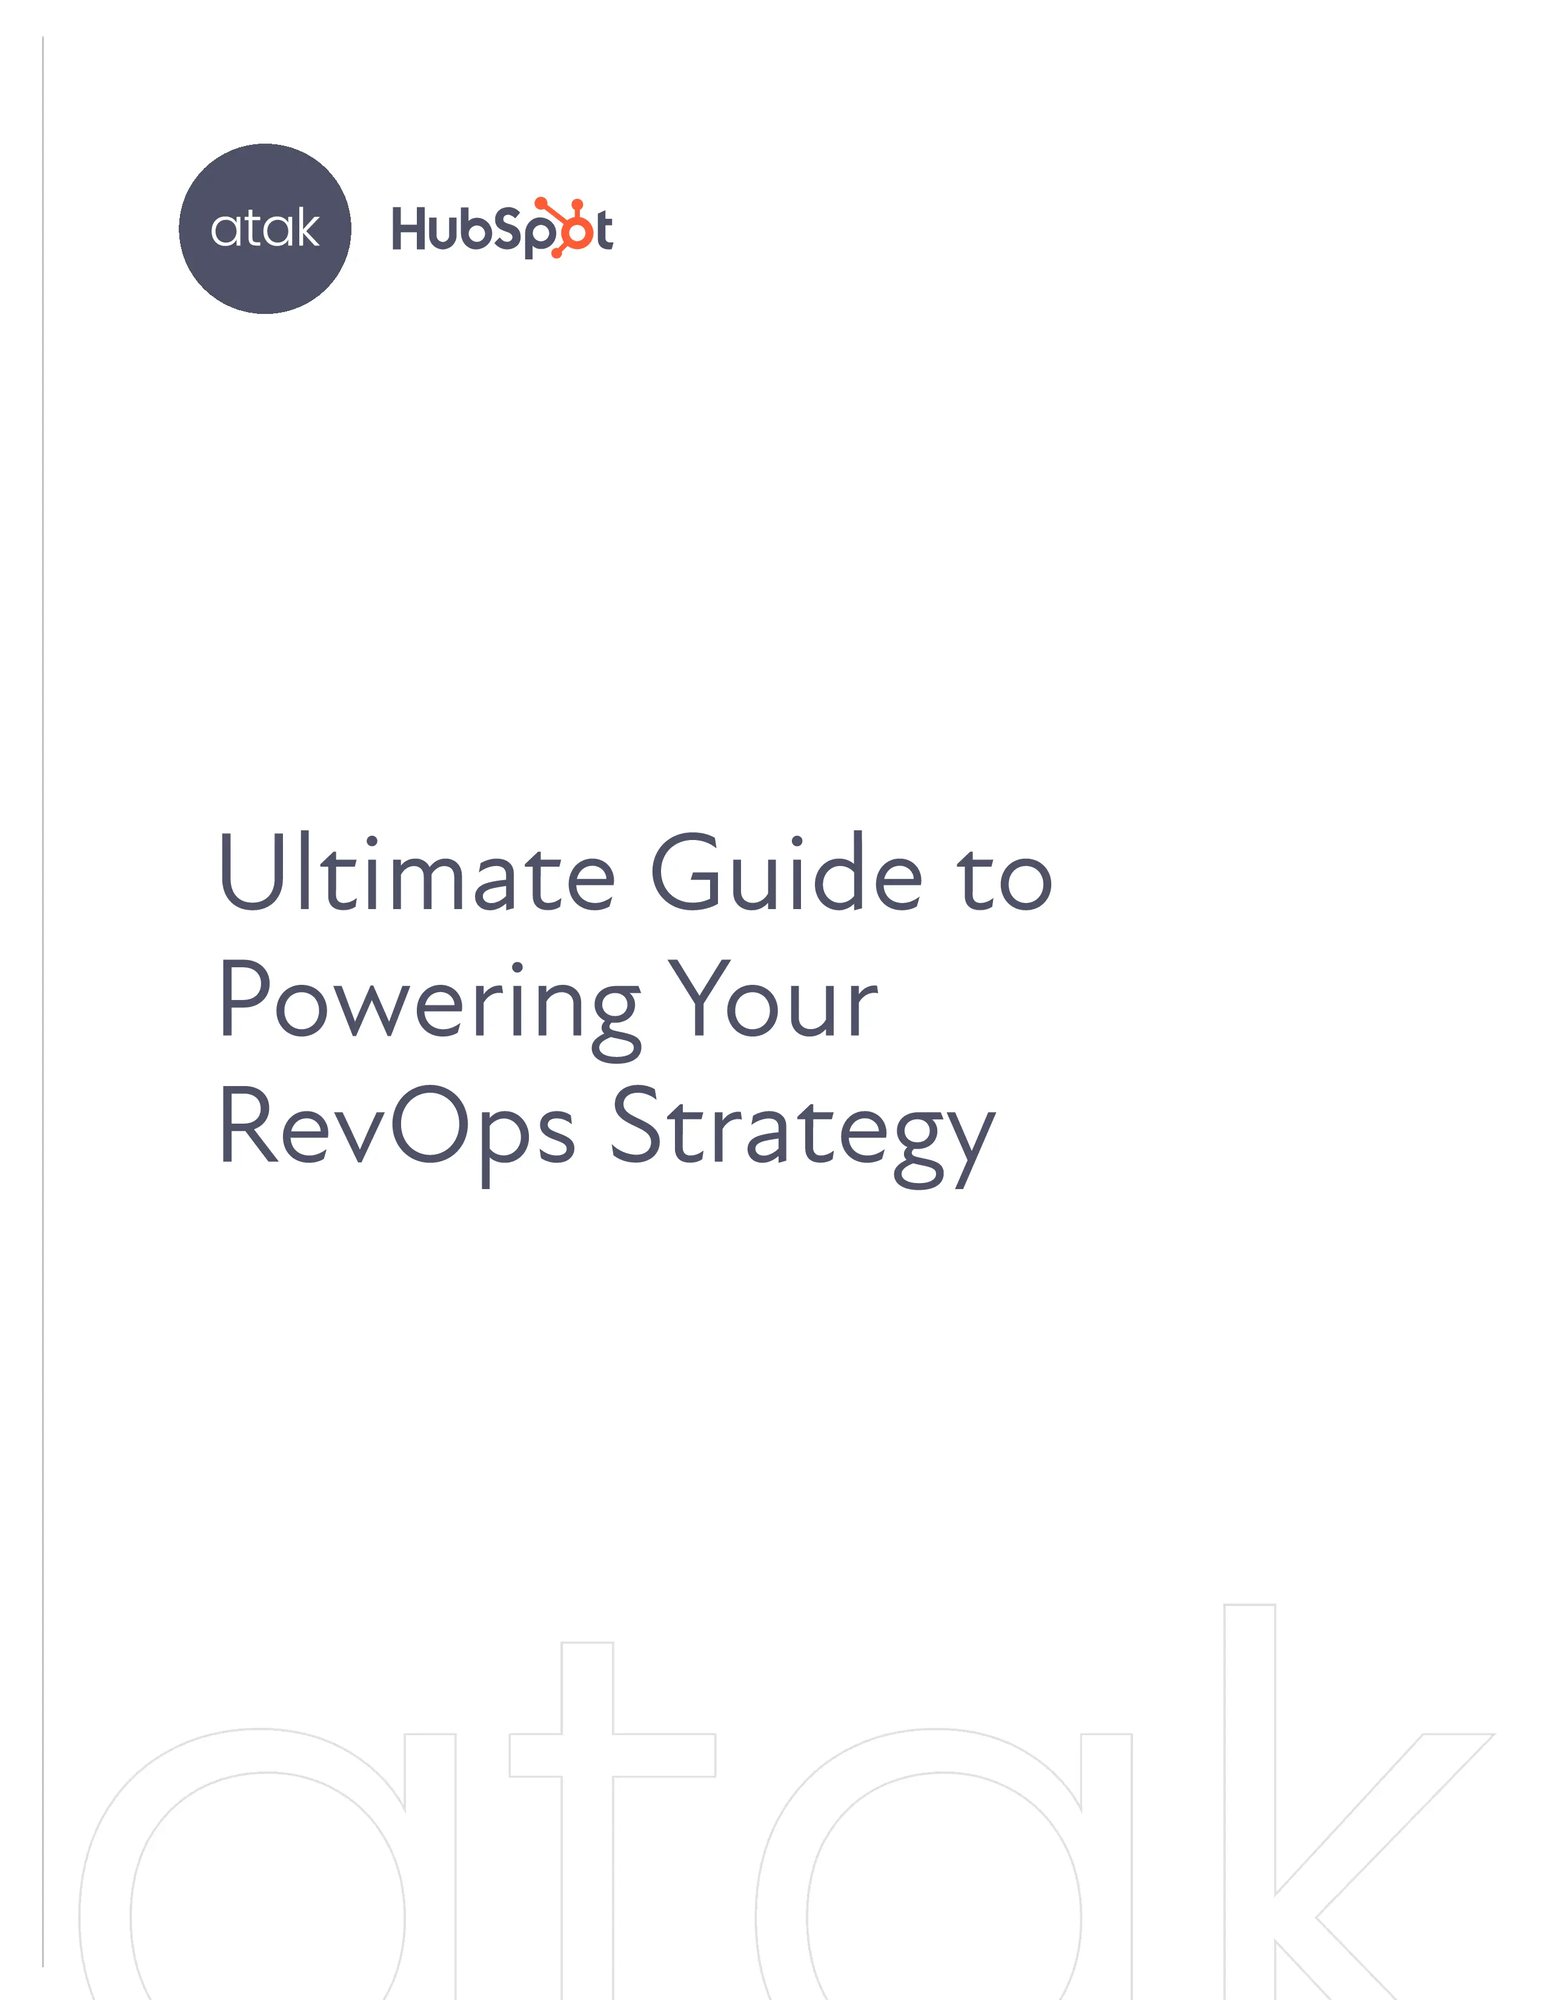 Ultimate Guide to Powering Your RevOps Strategy